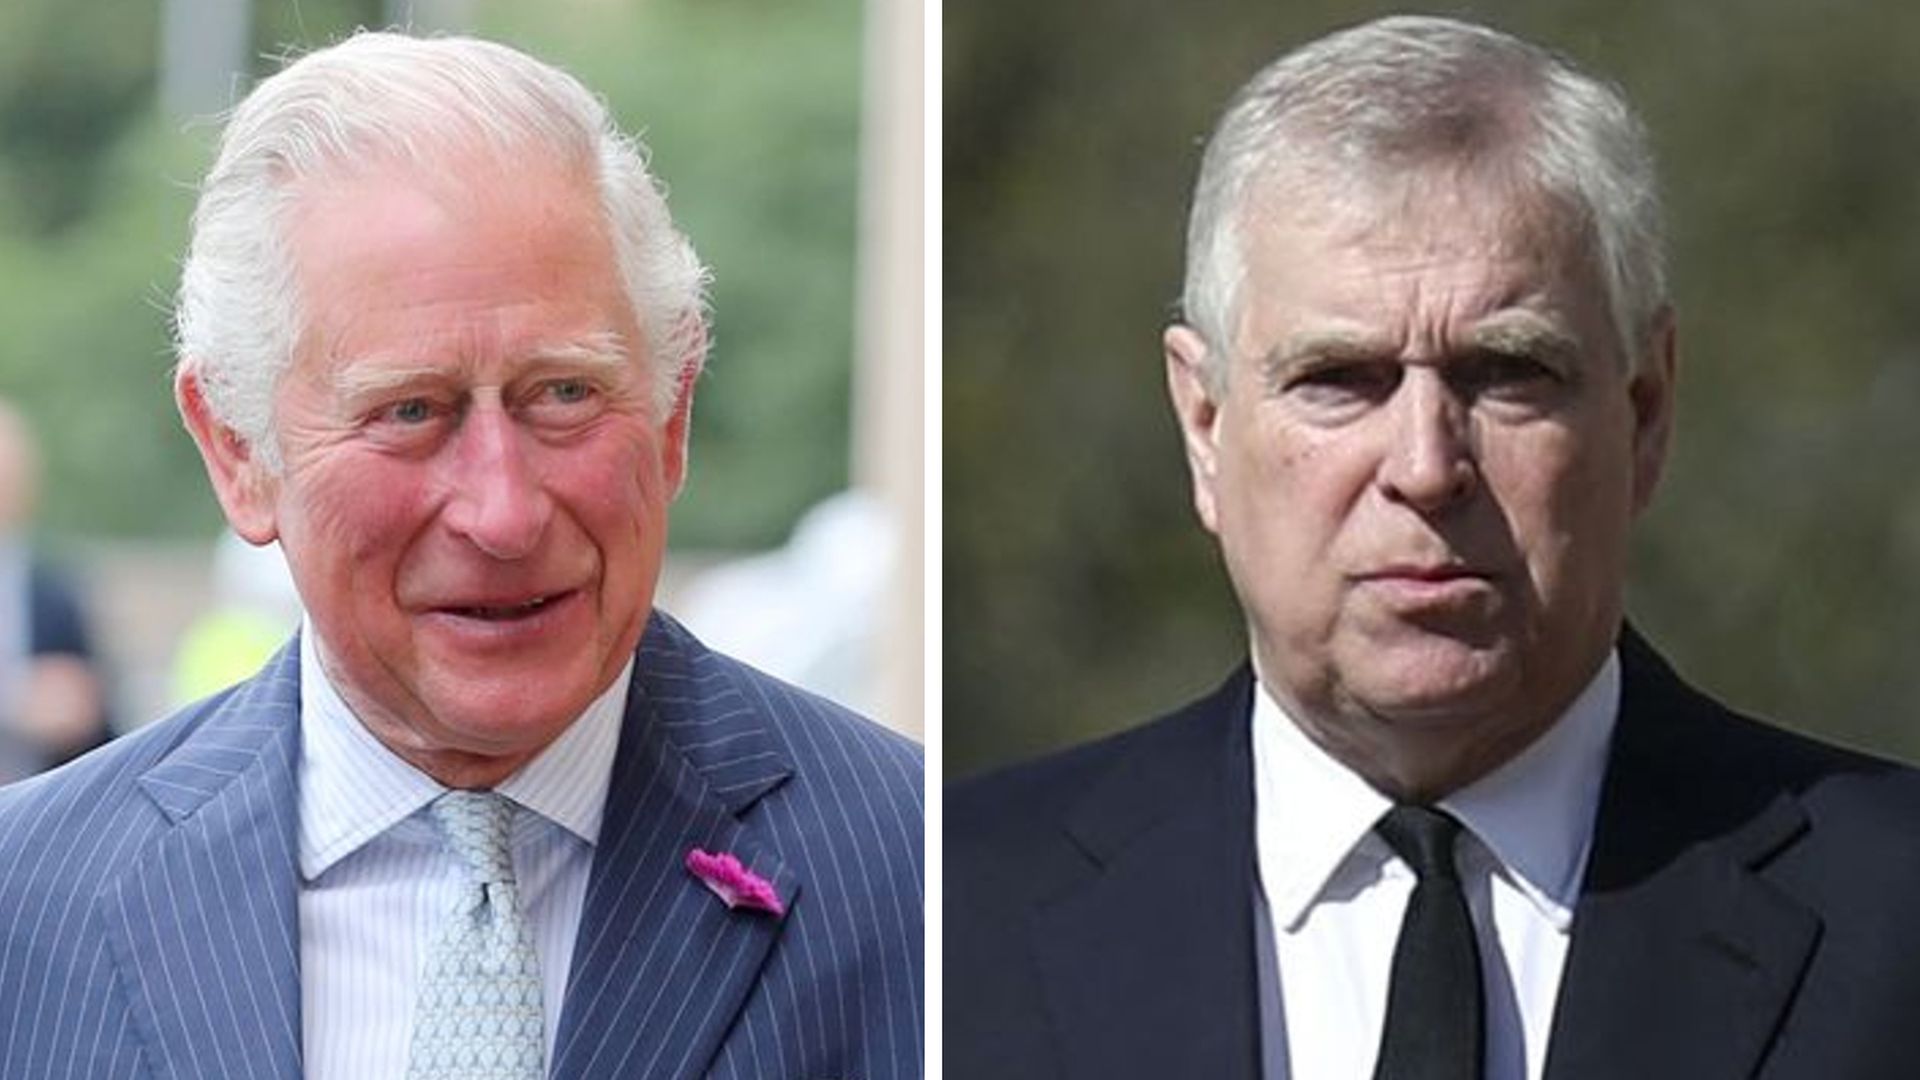 After the deal: Prince Charles pays Andrews compensation